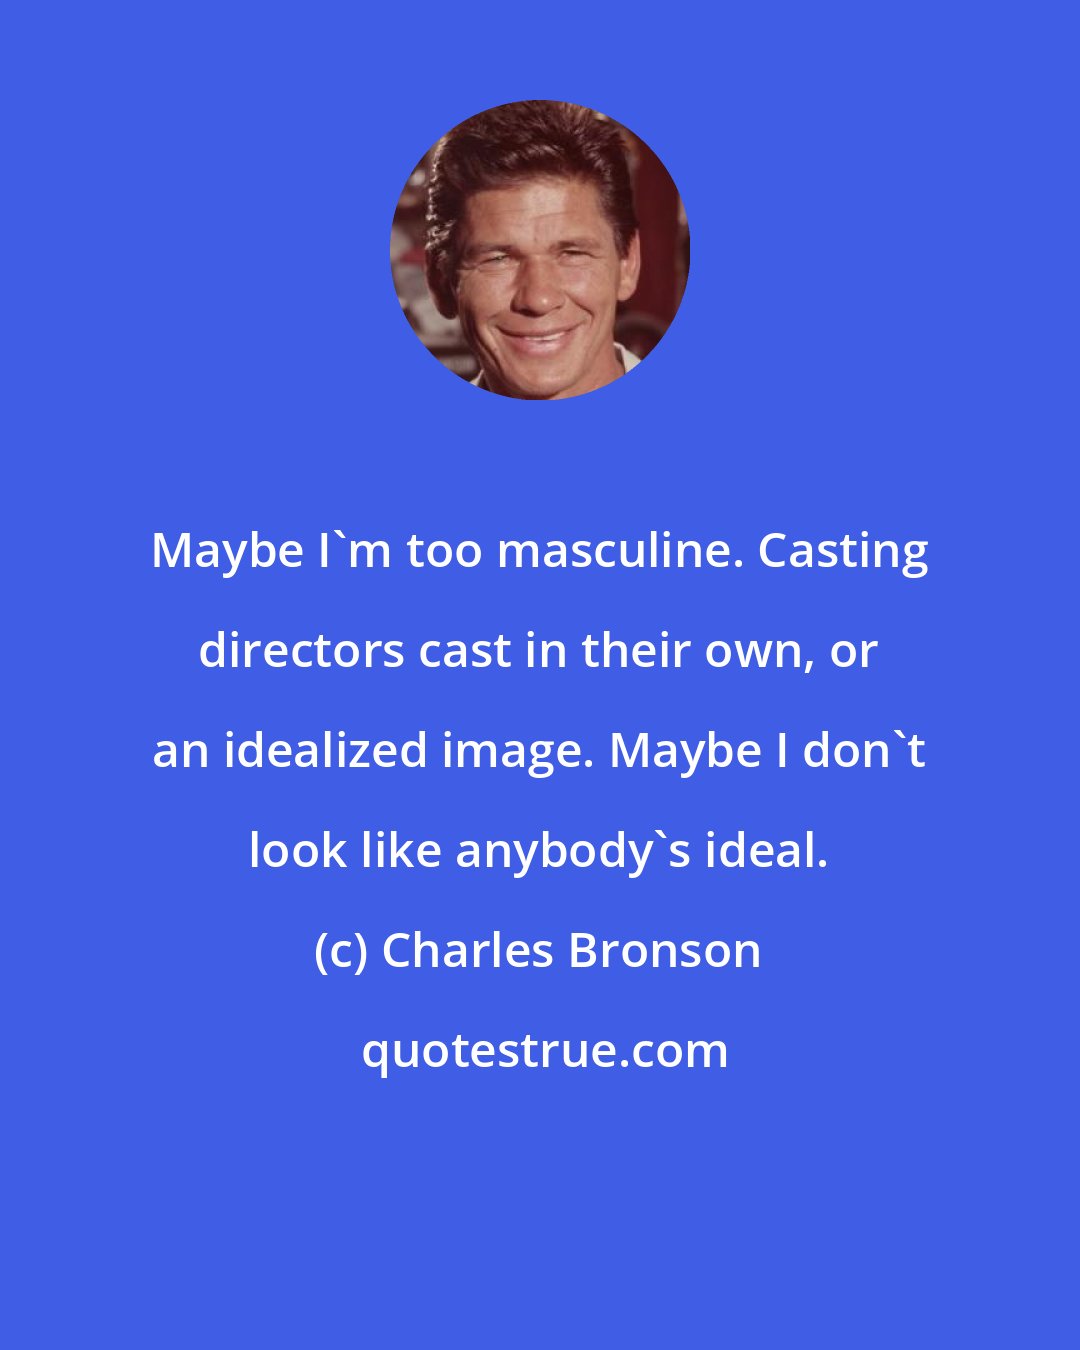 Charles Bronson: Maybe I'm too masculine. Casting directors cast in their own, or an idealized image. Maybe I don't look like anybody's ideal.